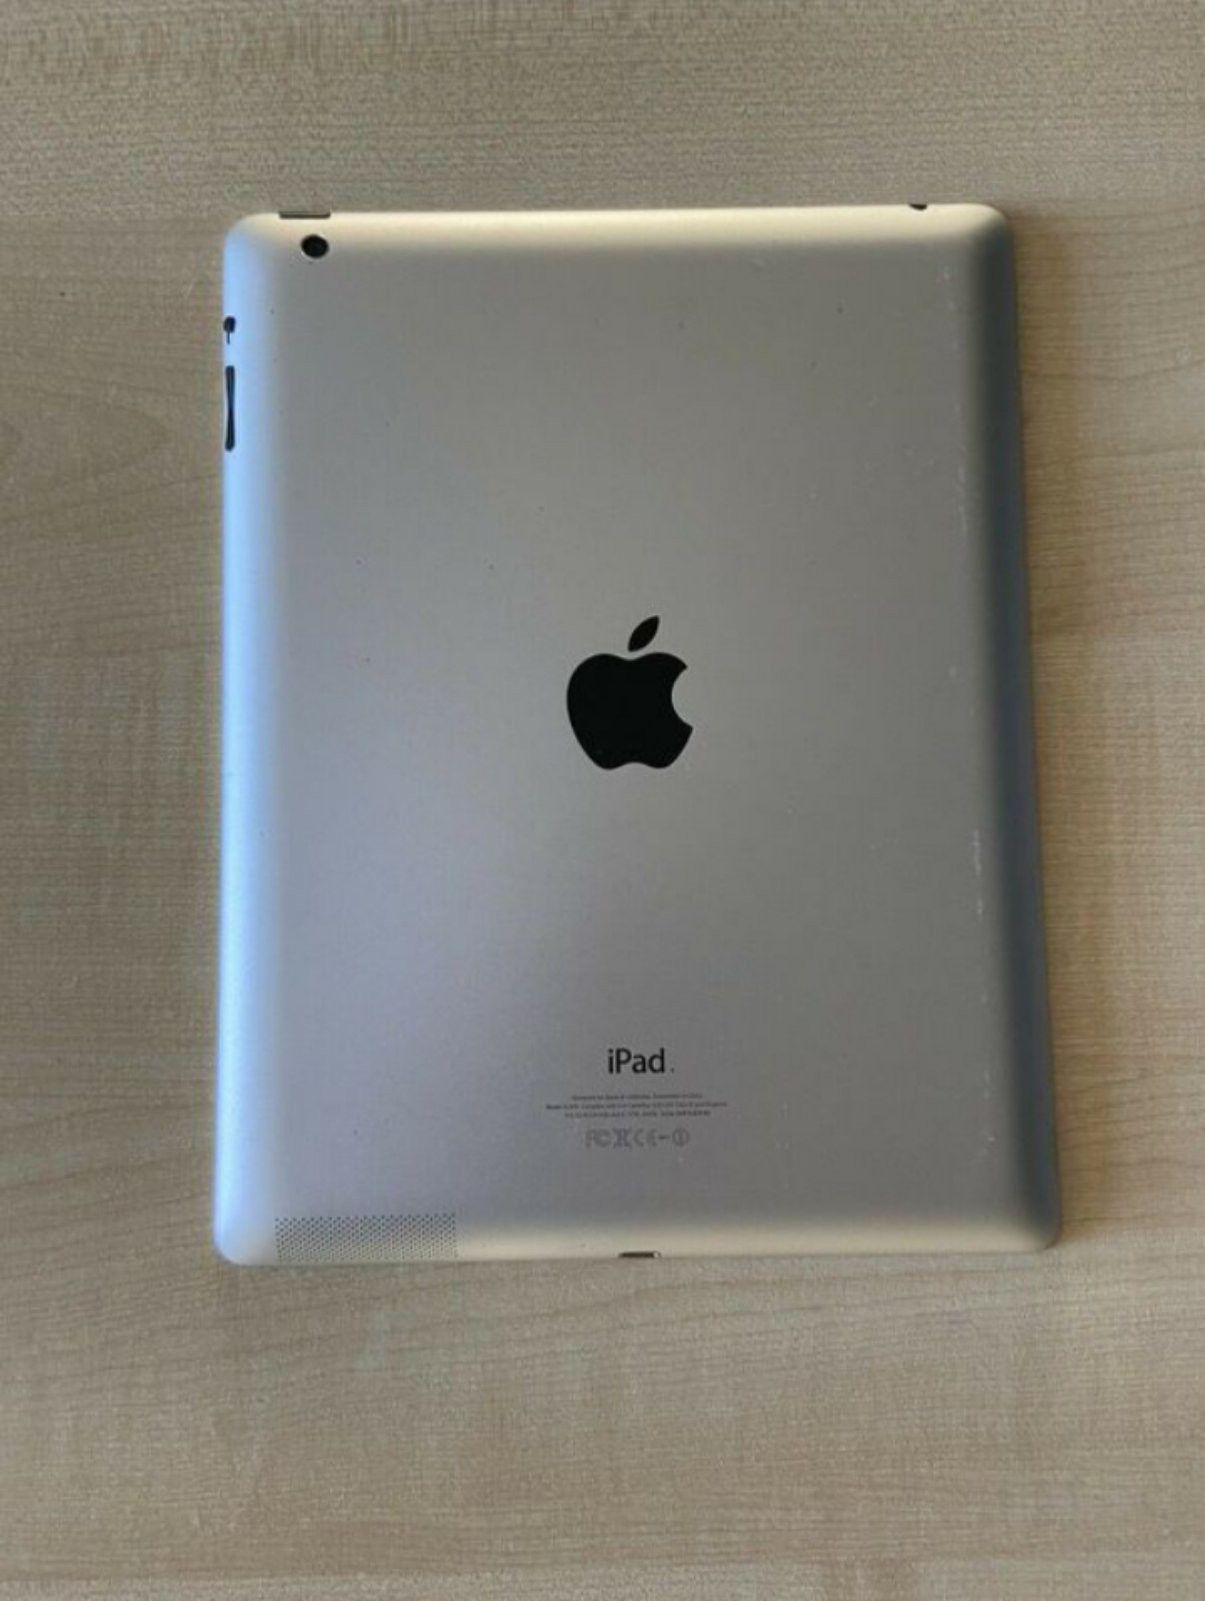 iPad 2 | 2nd Generation | Wi-Fi Internet access | 9.7 inch big size iPad | Usable with Wi-Fi ONLY